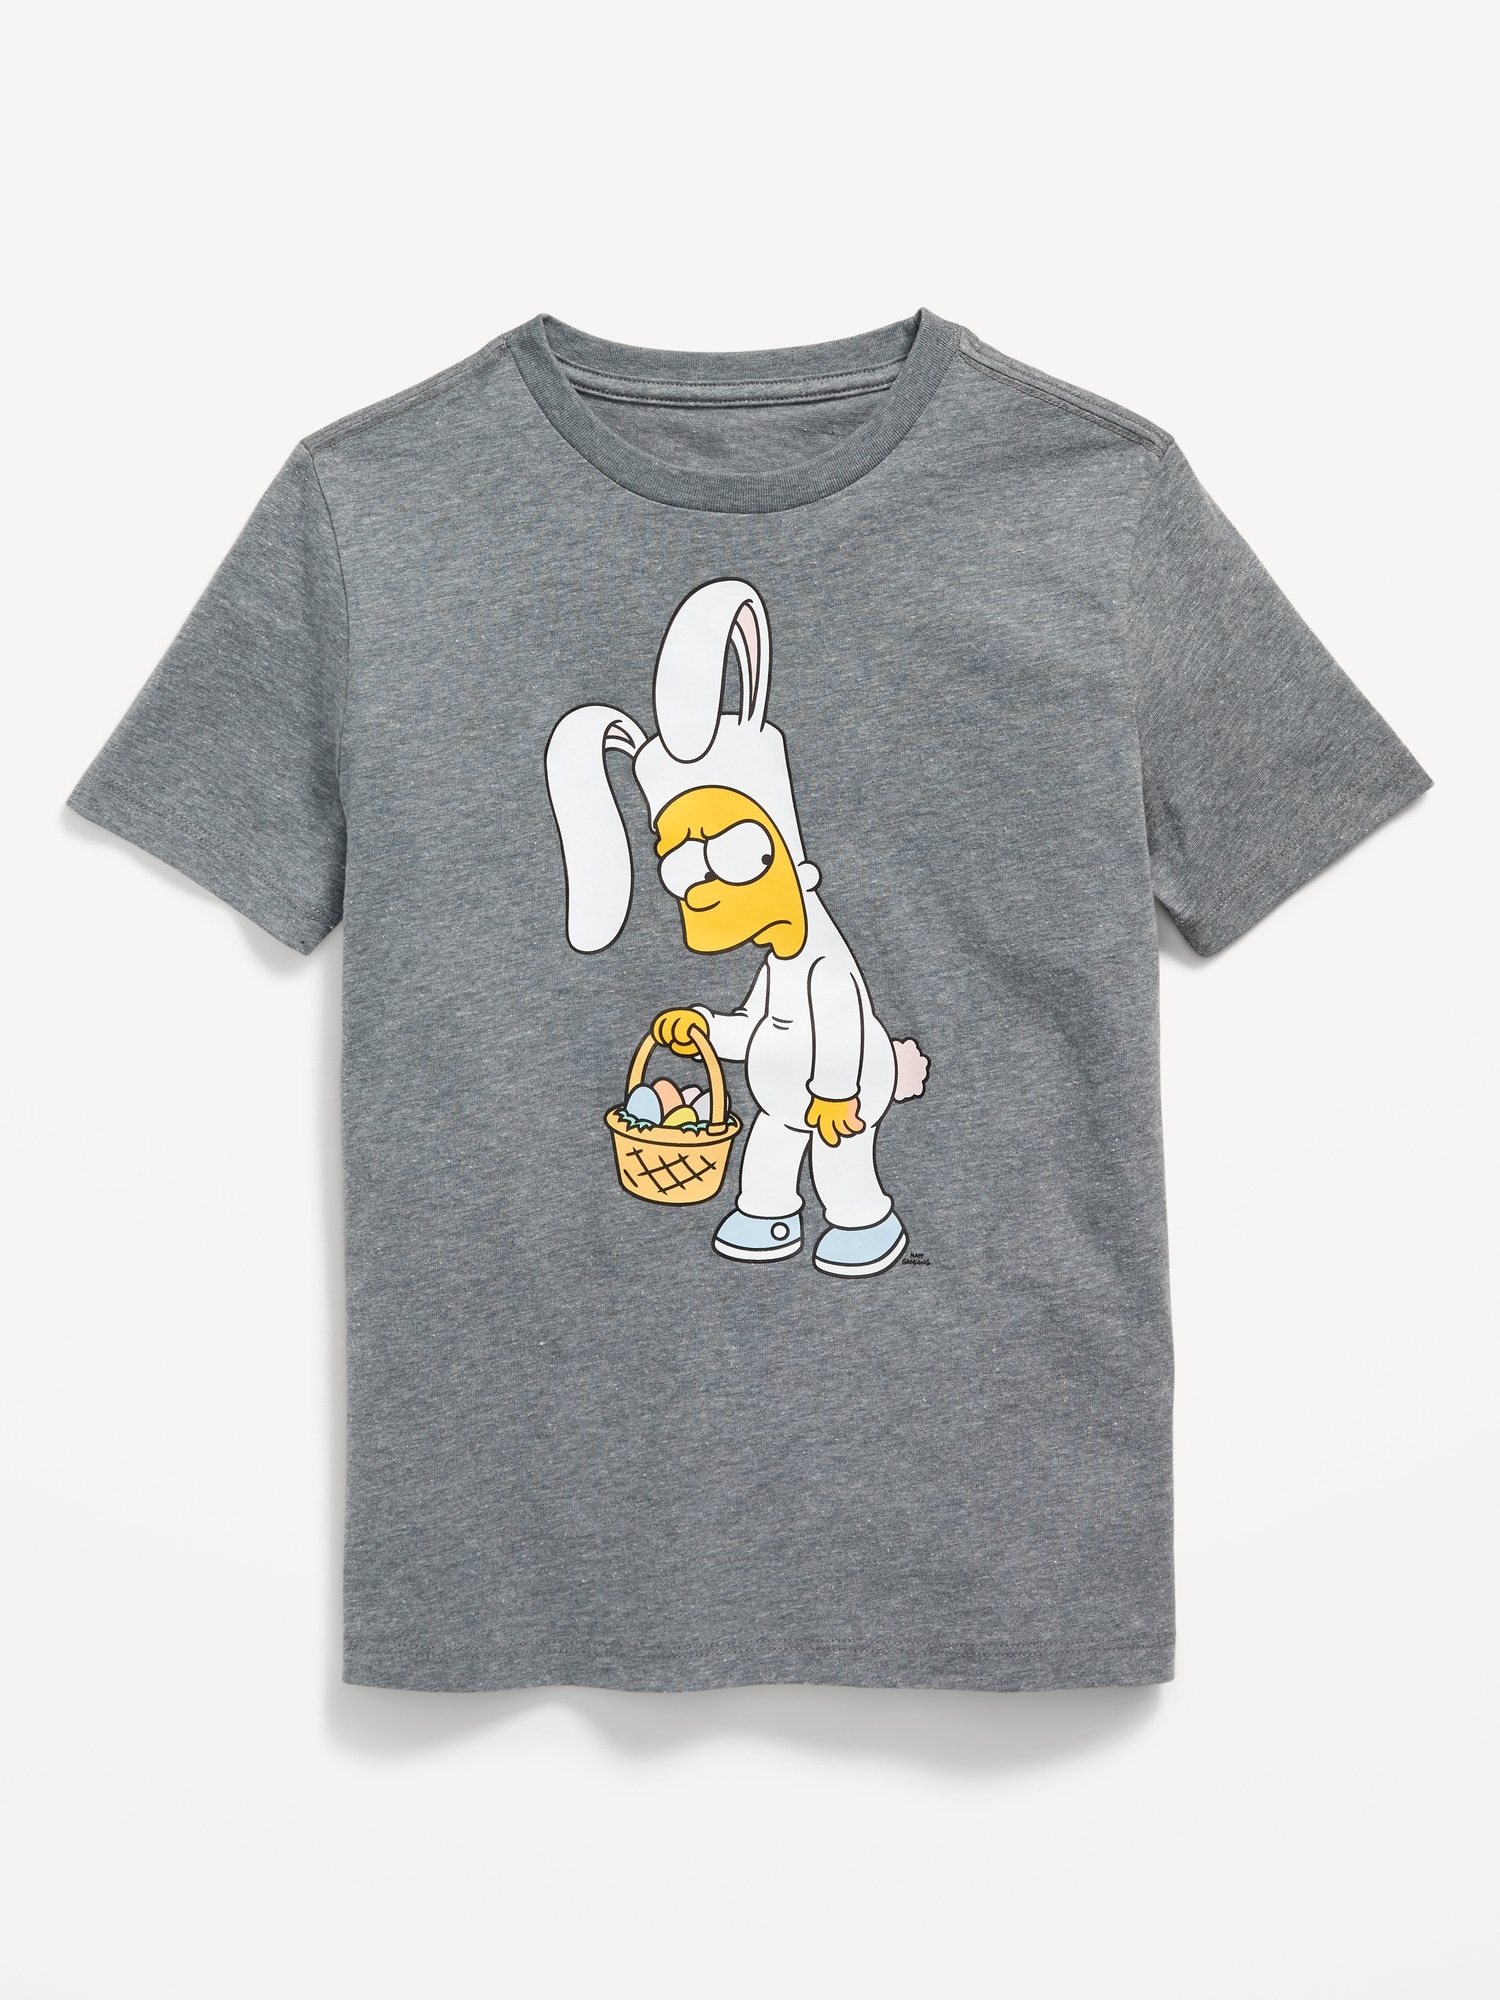 Not a Simpsons Character / Soft T